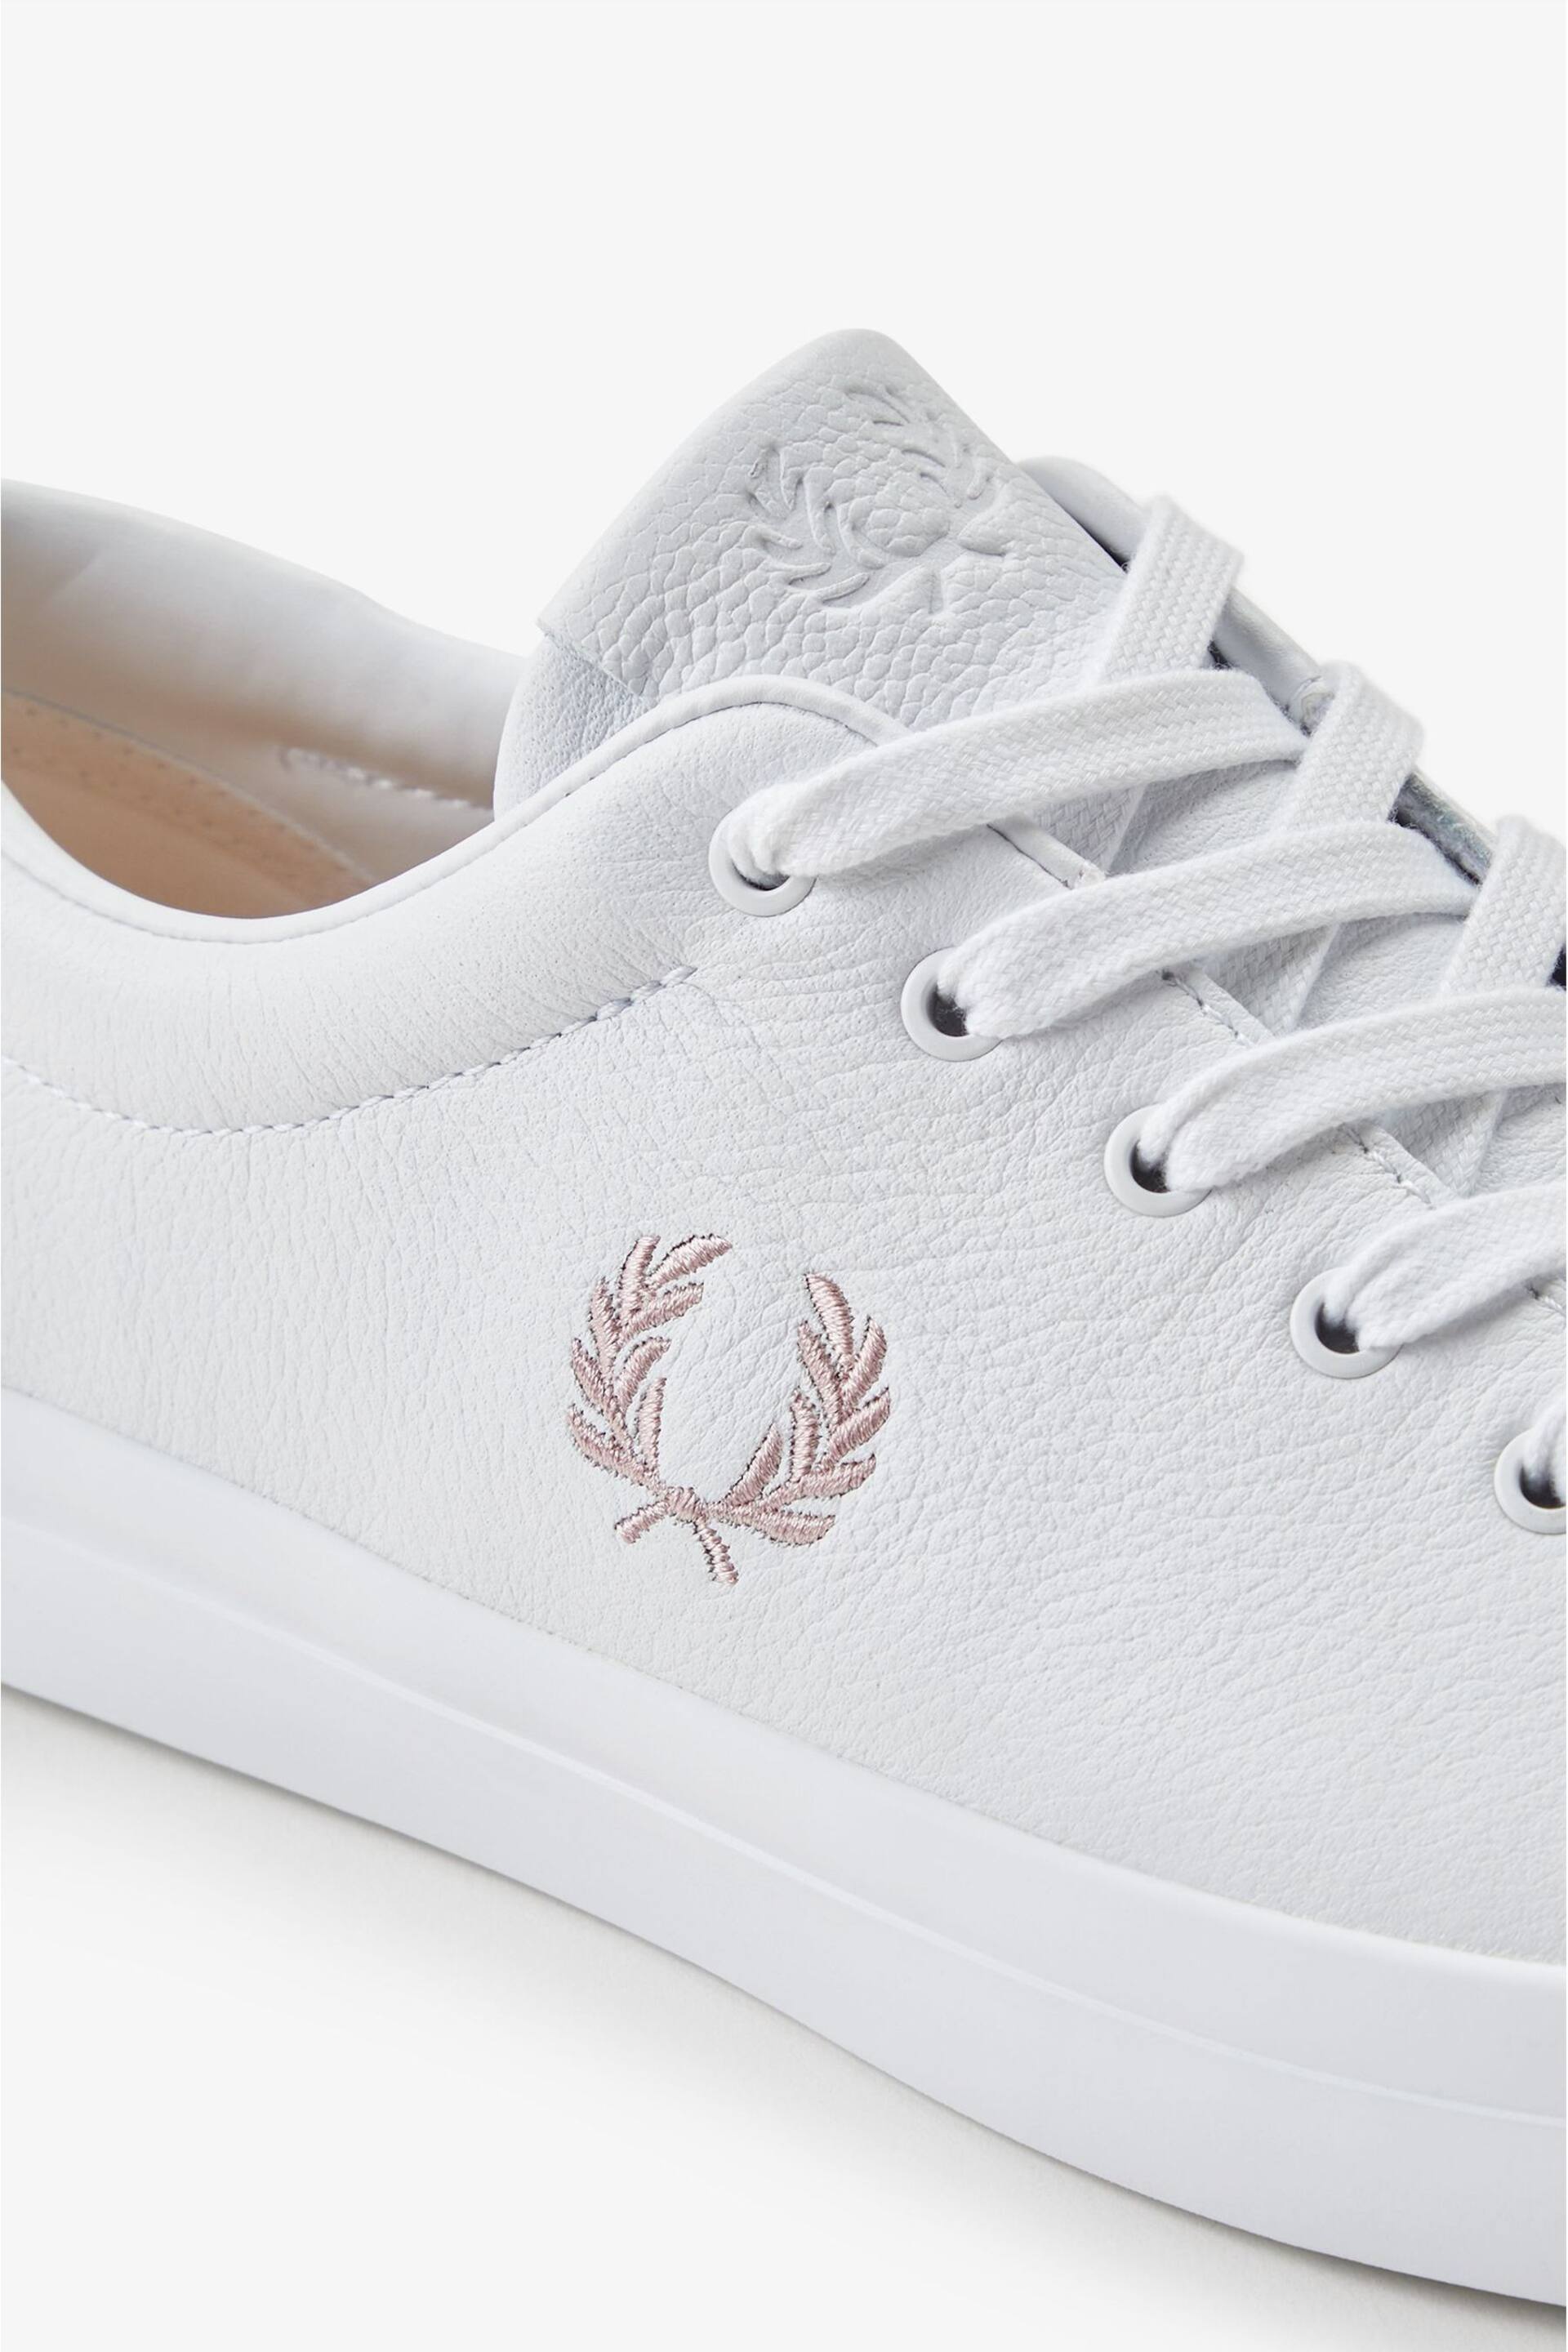 Fred Perry Womens White Lottie Leather Trainers - Image 5 of 5